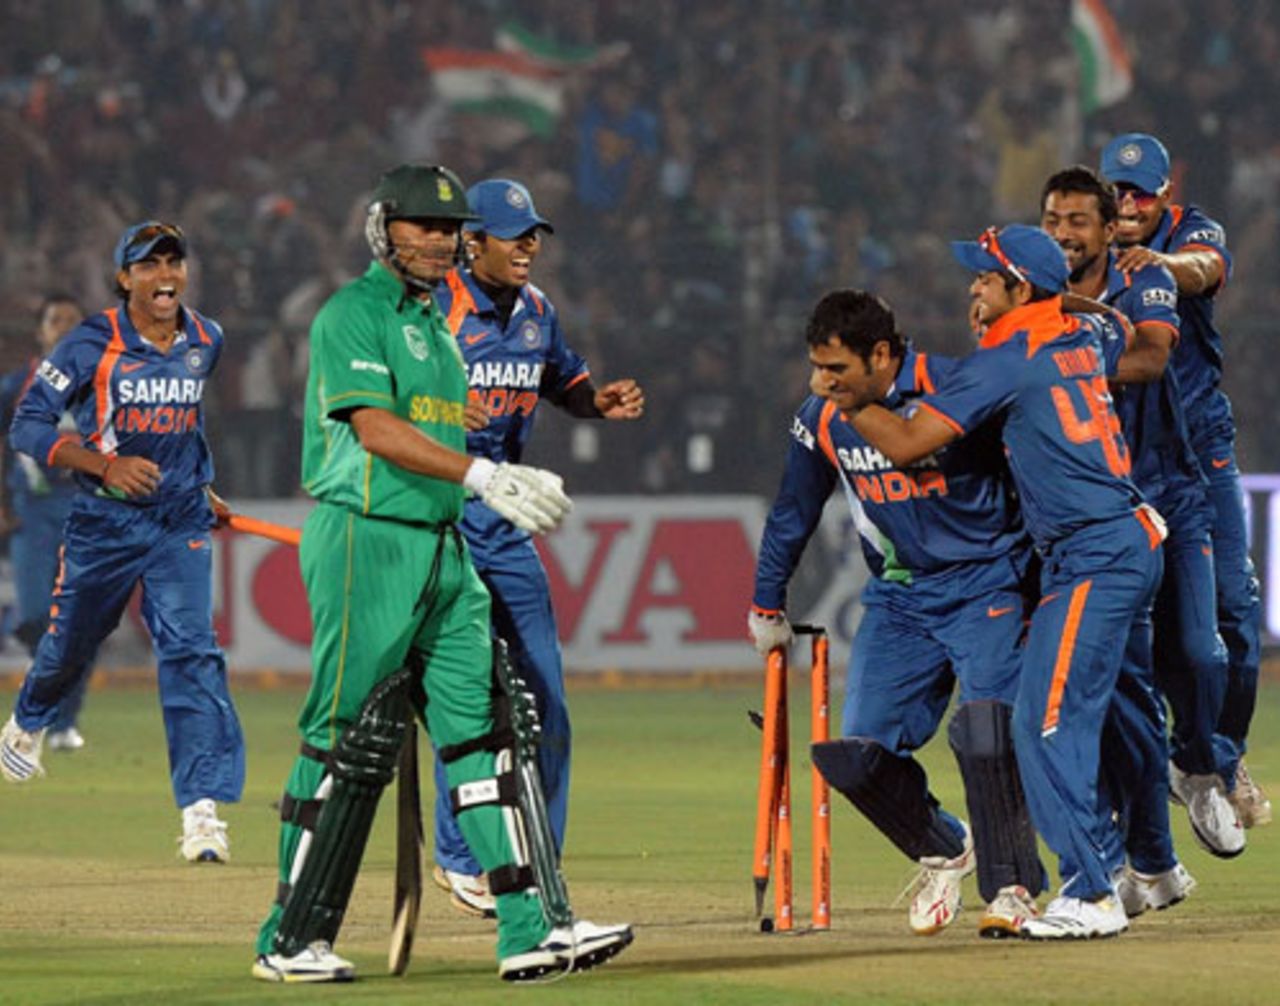 The Indian team is cock-a-hoop after securing the win, India v South Africa, 1st ODI, Jaipur, February 21, 2010